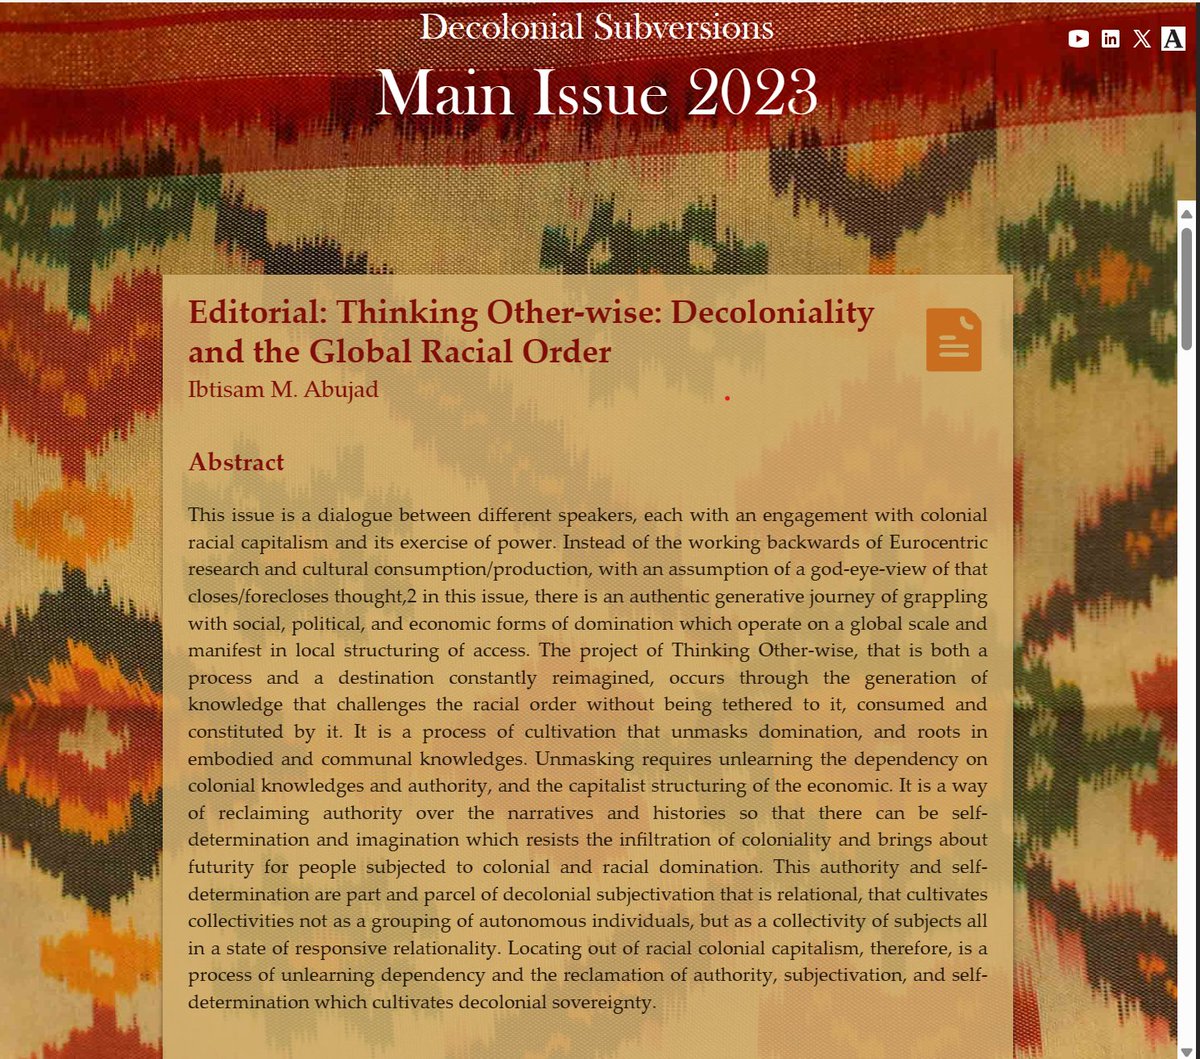 We are delighted to announce that our Annual Volume 2023 entitled 'Thinking Other-wise: Decoloniality and the Global Racial Order' edited by Ibtisam Abujad has now become available! Access it here: decolonialsubversions.org/main_issue_202…